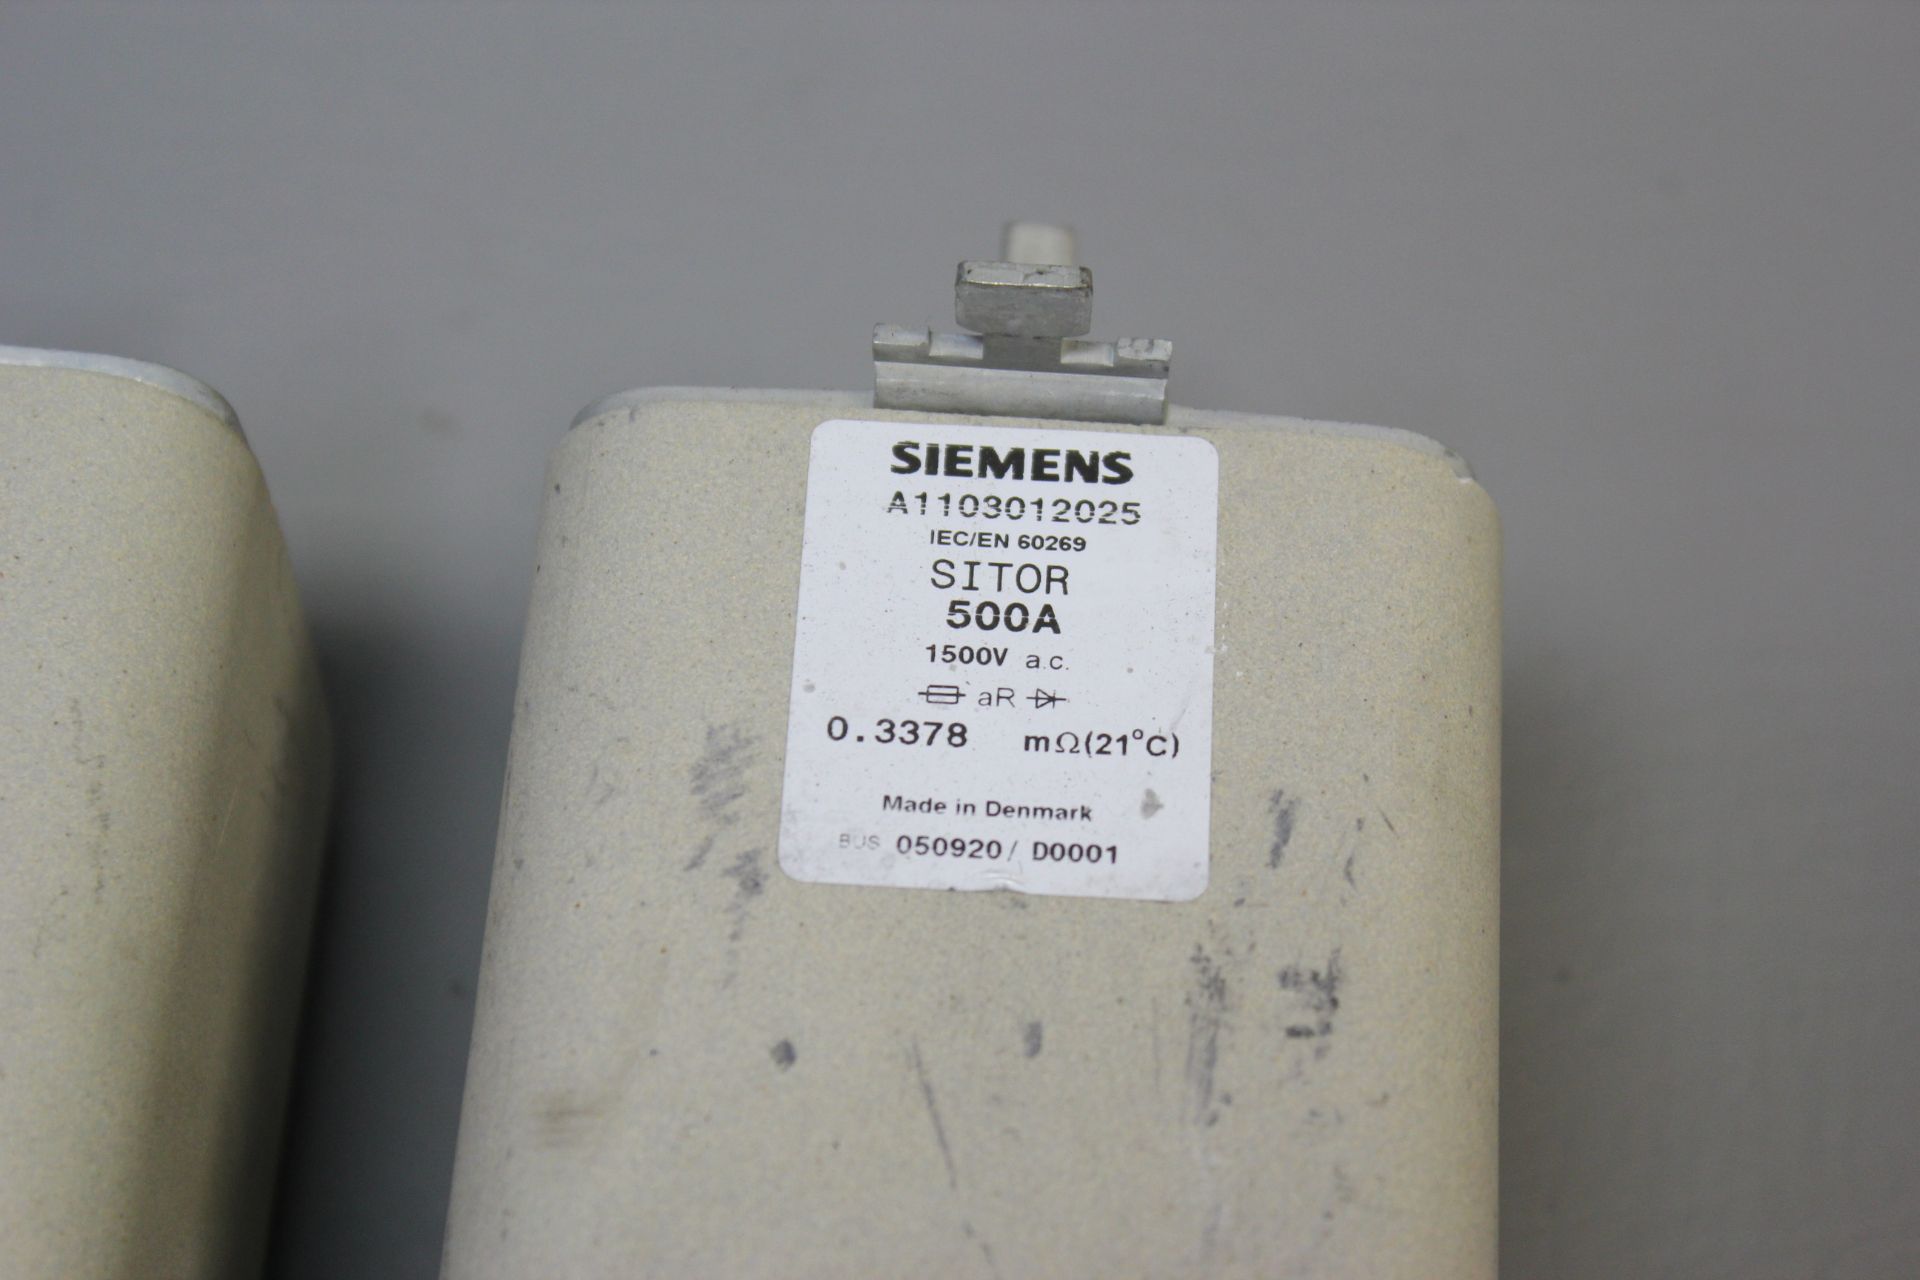 LOT OF 2 SIEMENS SITOR 500A SEMICONDUCTOR FUSES - Image 2 of 3